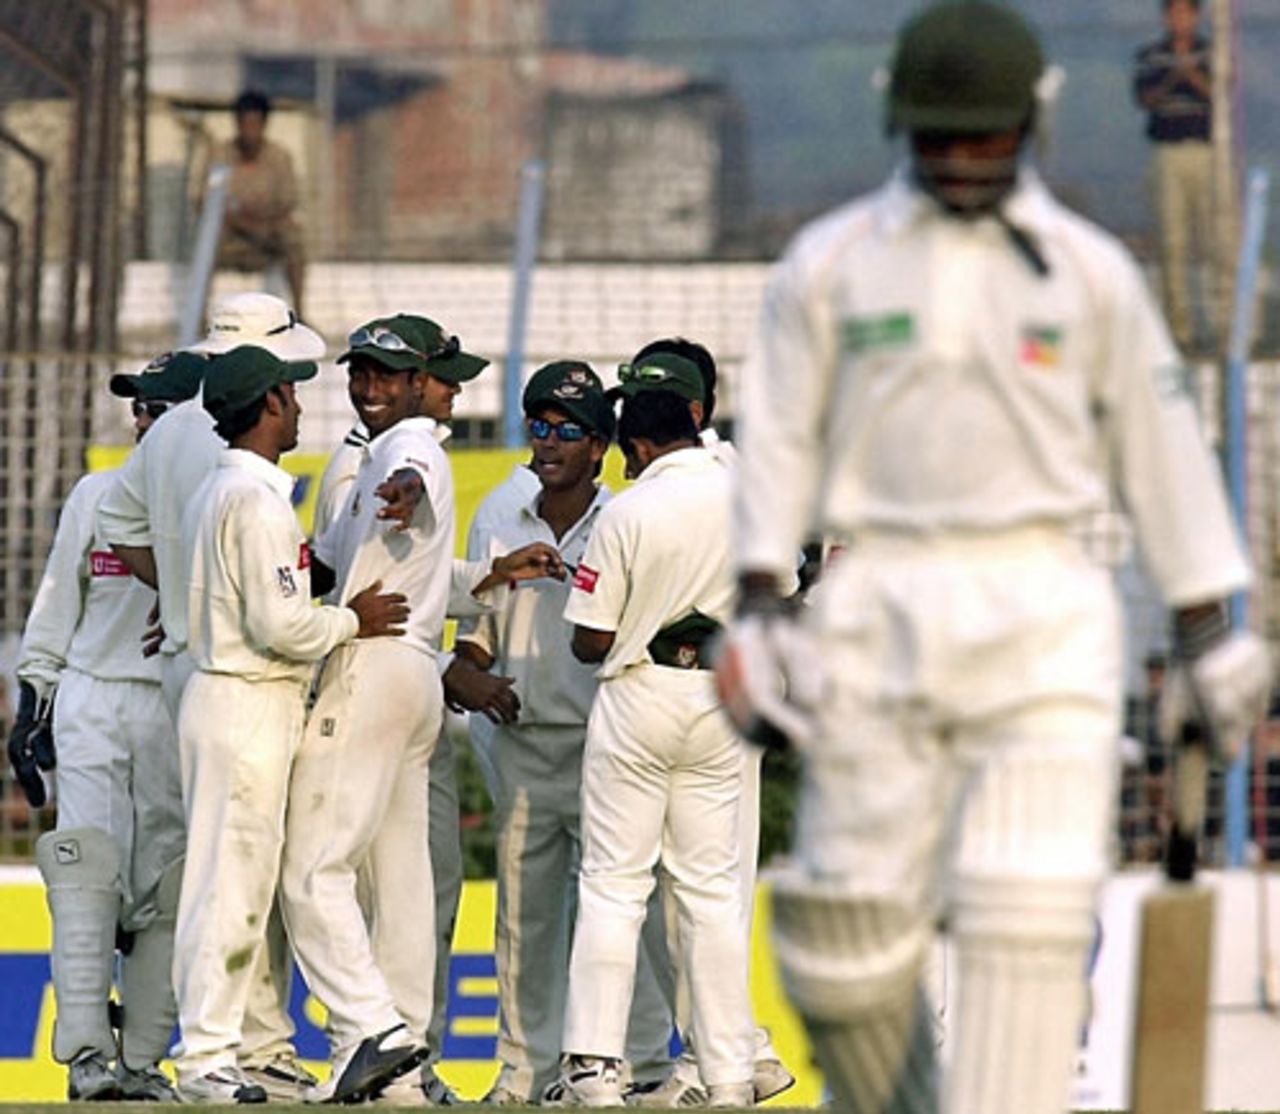 Tatenda Taibu walks off after his dismissal in the penultimate over of the day, Bangladesh v Zimbabwe, 1st Test, Chittagong, 3rd day, January 8, 2005